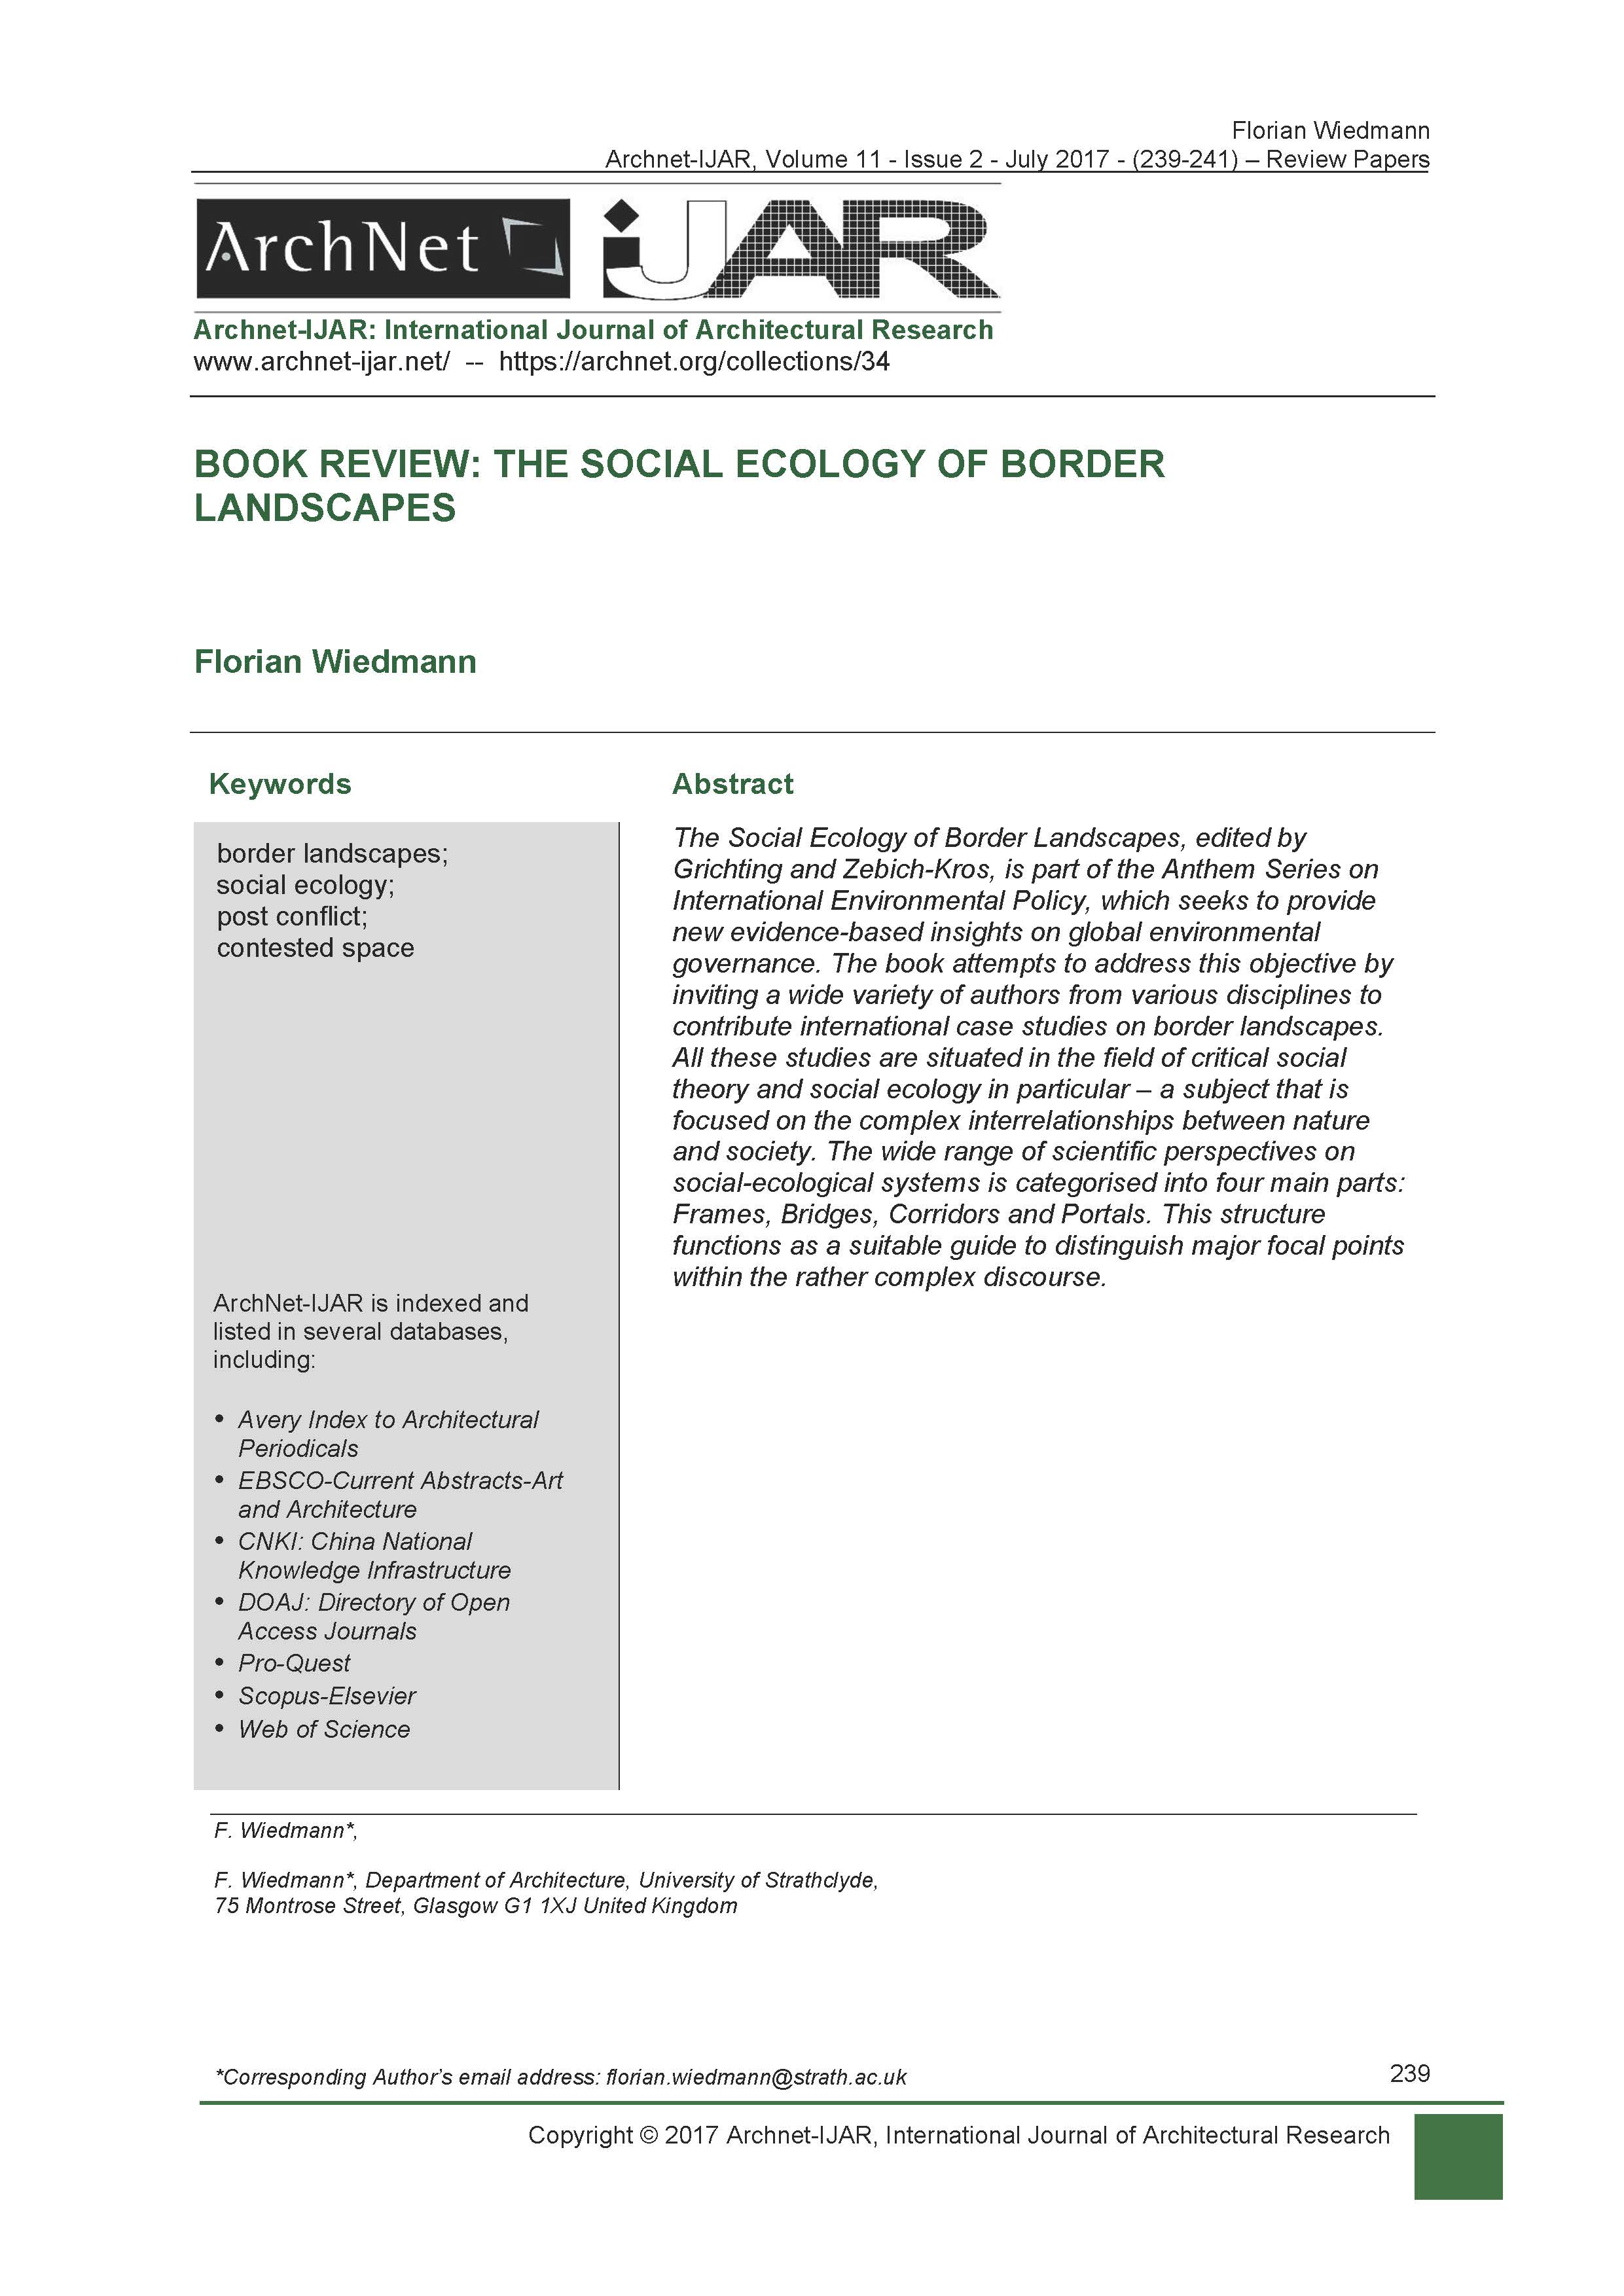 Book Review: The Social Ecology of Border Landscapes